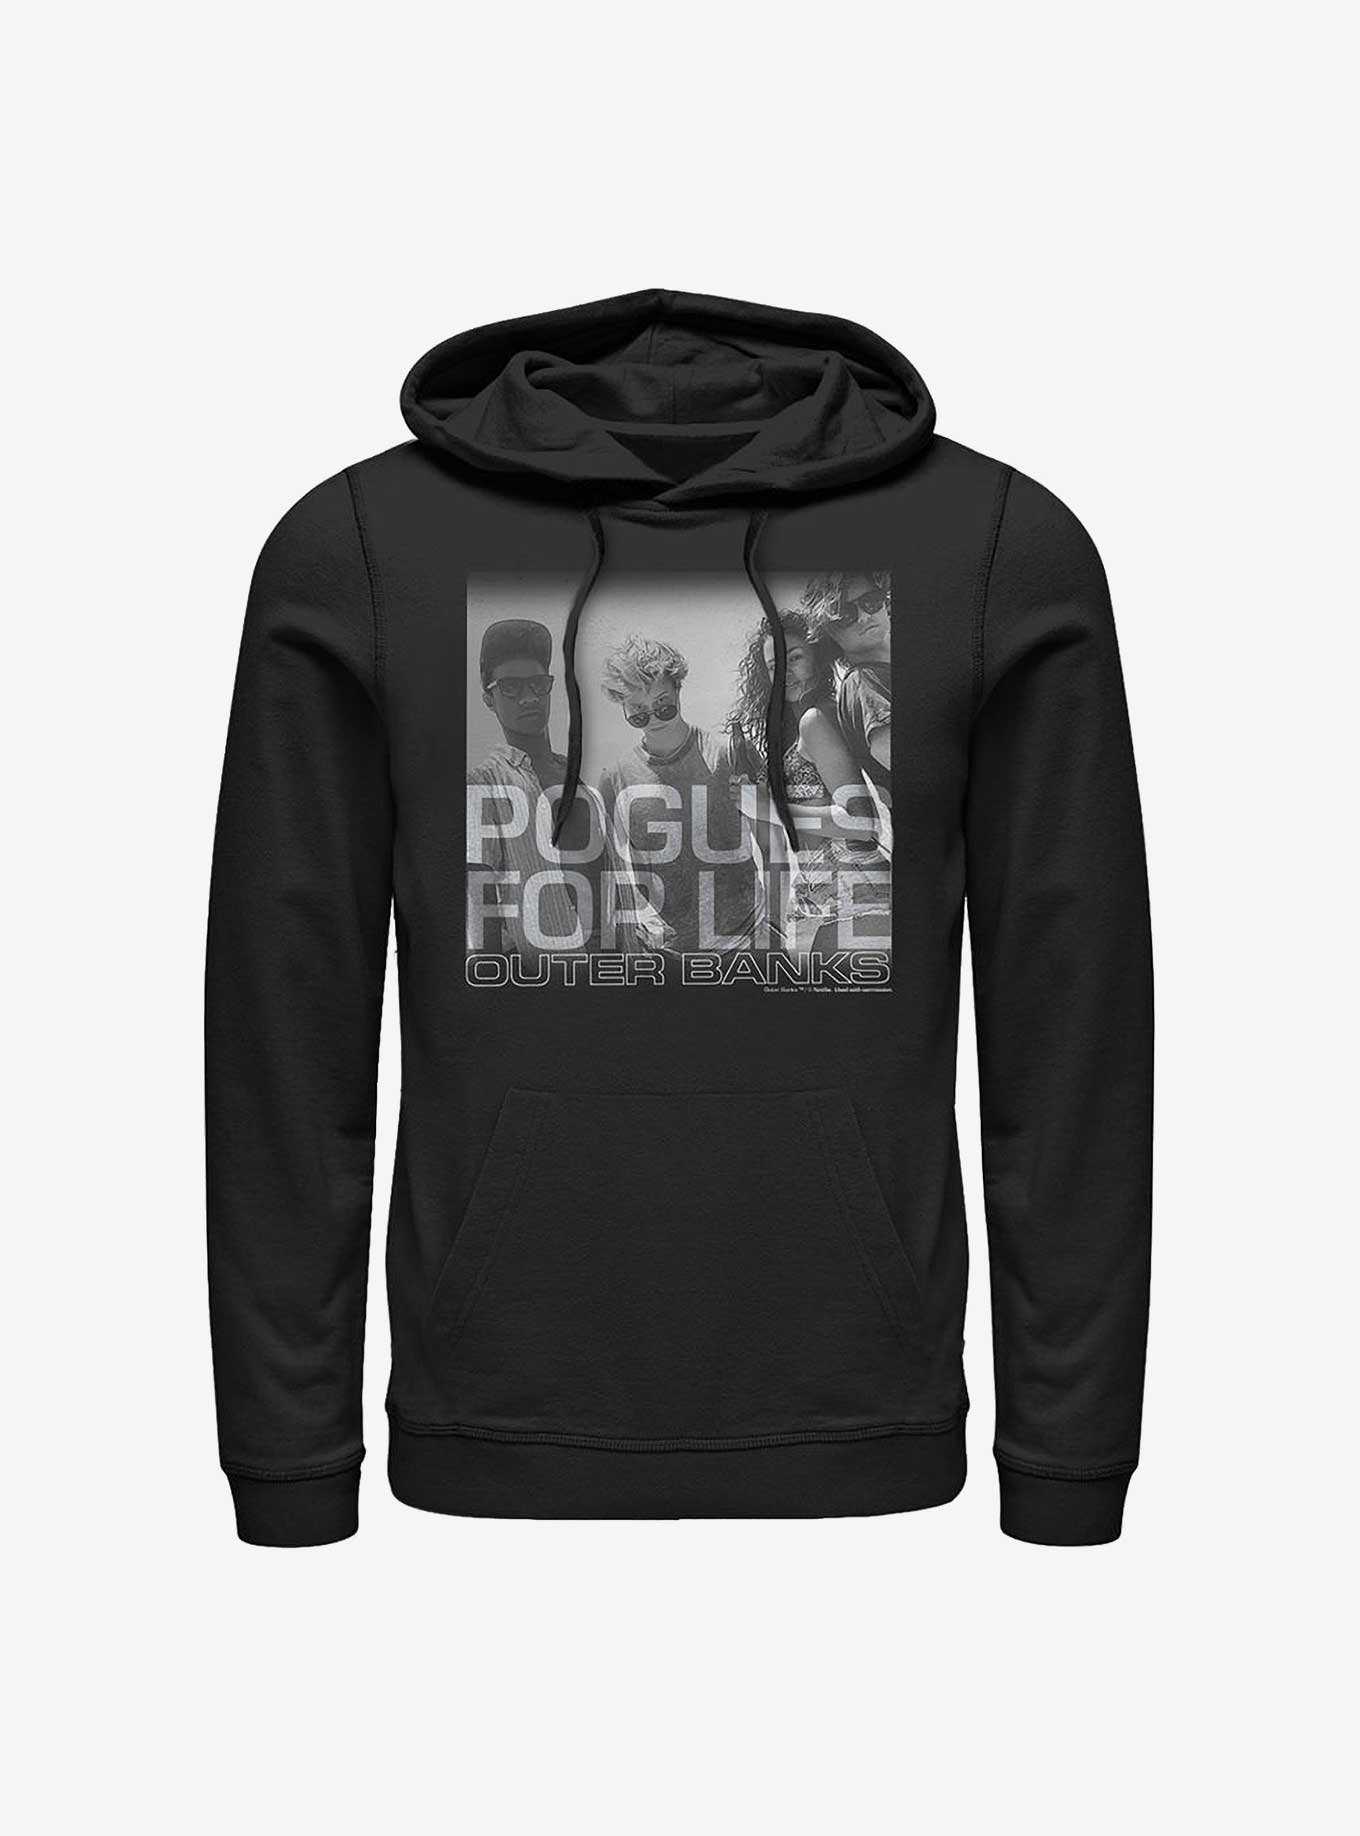 Outer Banks Pogues For Life Hoodie, , hi-res